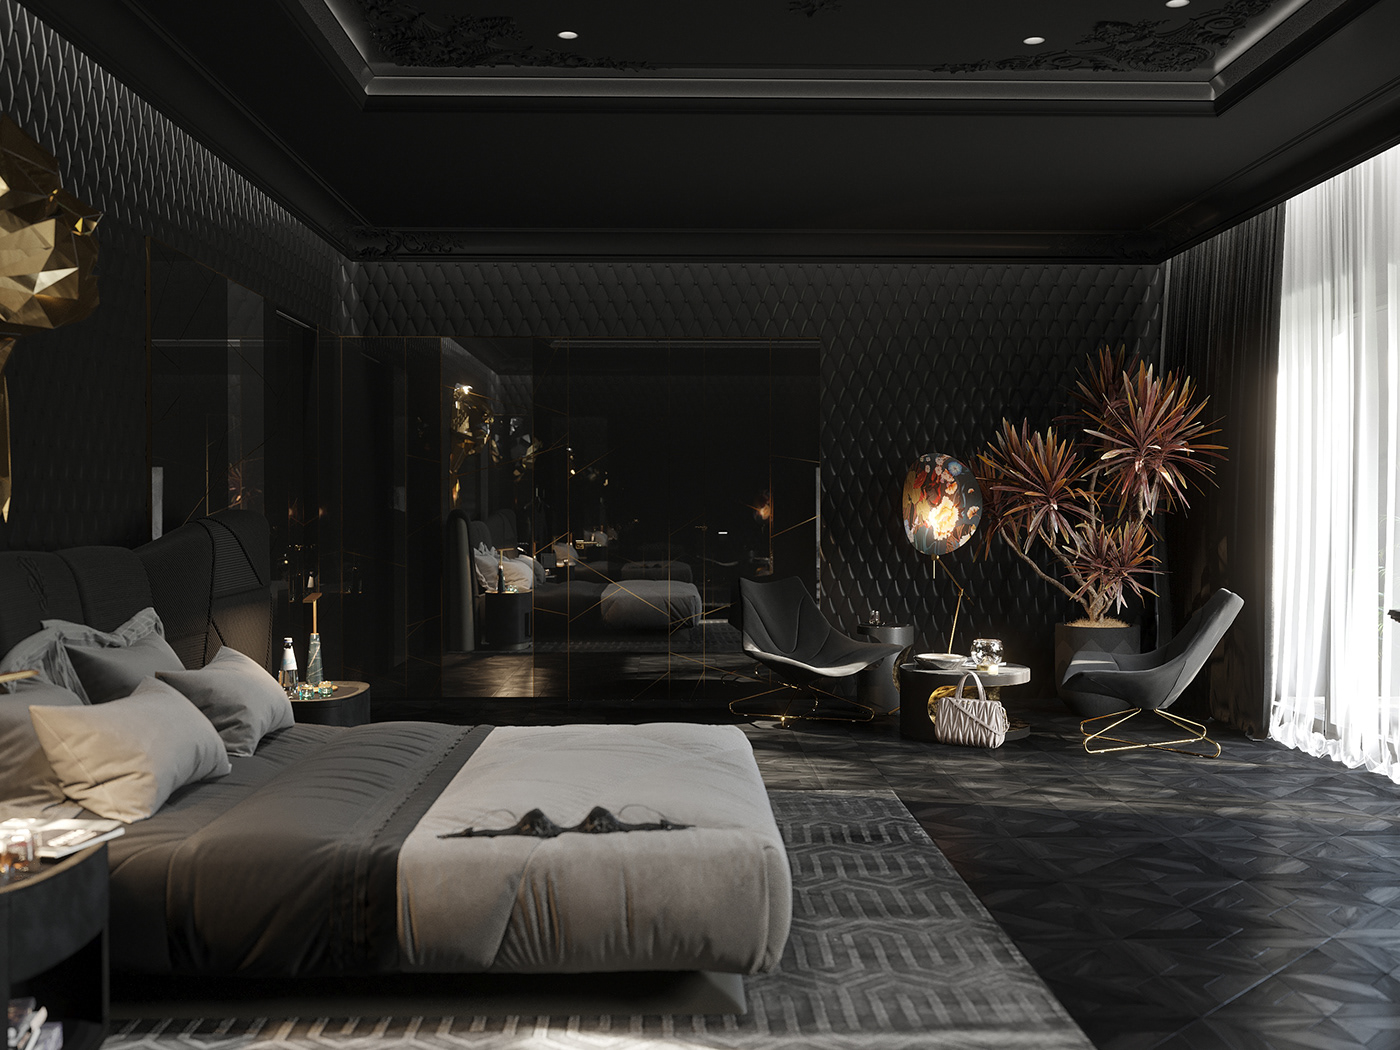 Bedroom for a girl black bedroom design gold Interior luxery visualization